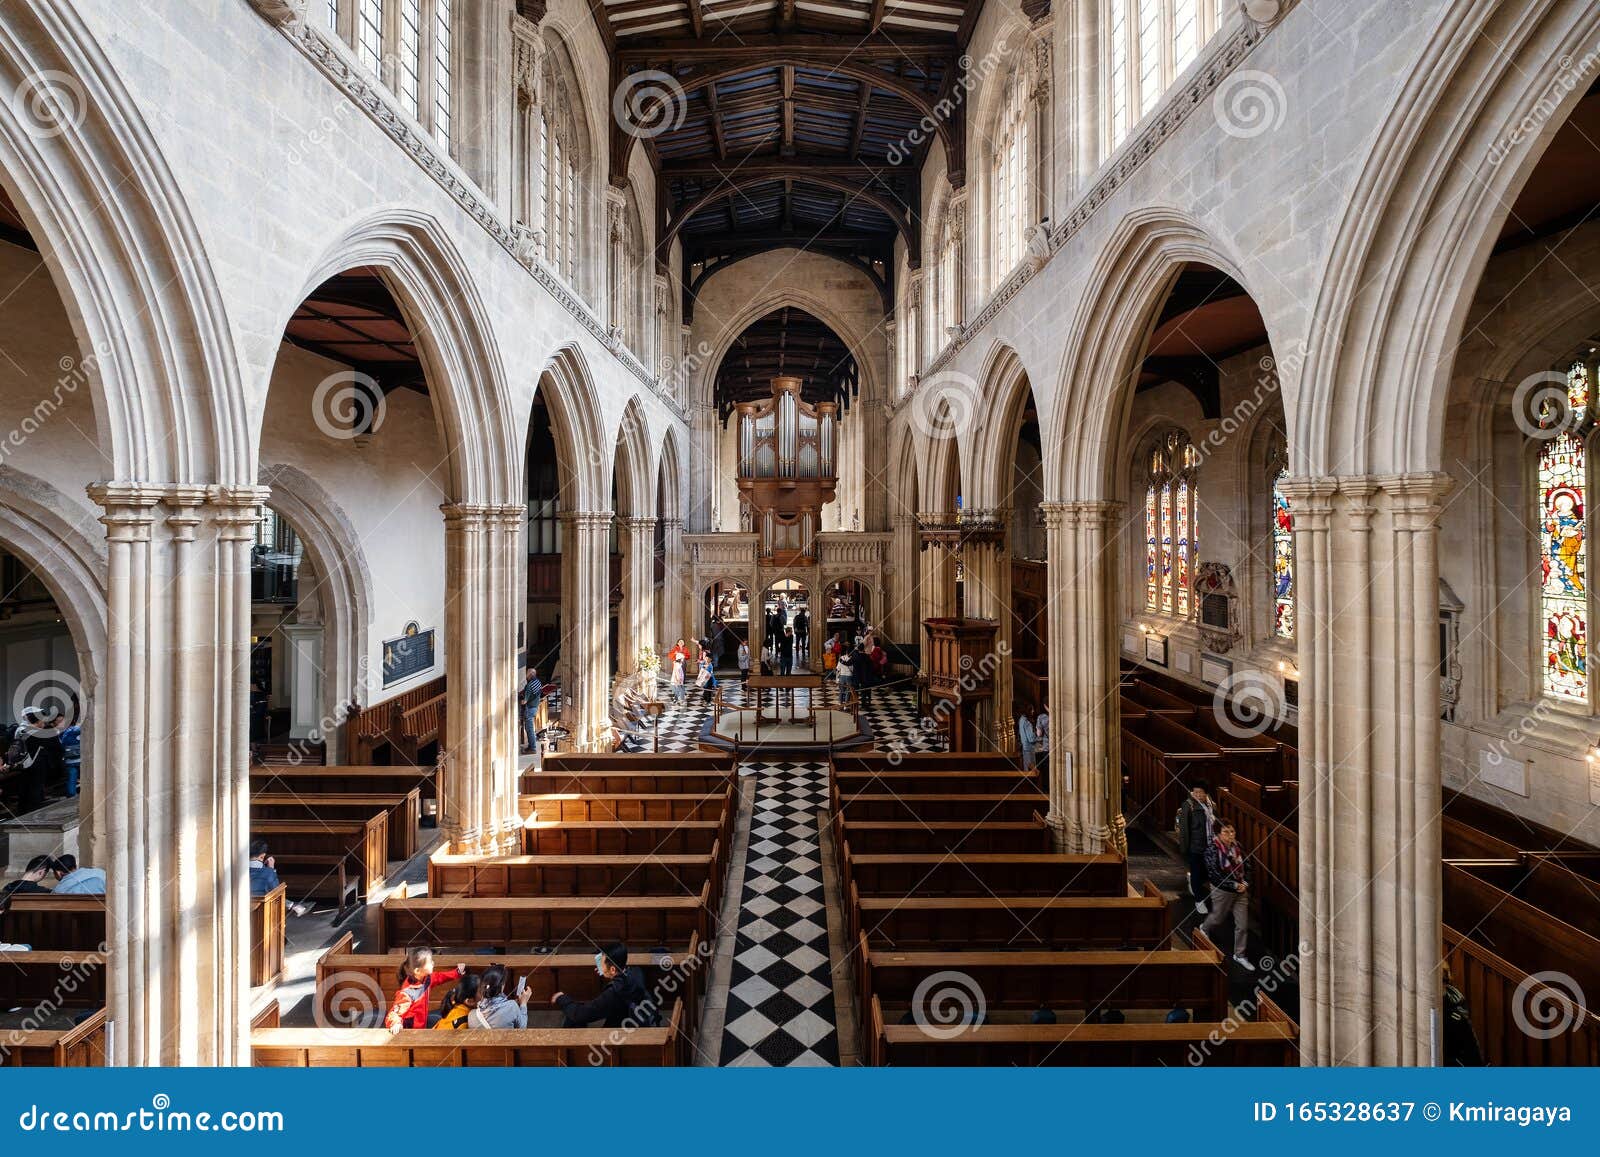 Interior Of The University Church Of St Mary The Virgin At Oxford In The Uk Editorial Photography Image Of Inside Great 165328637